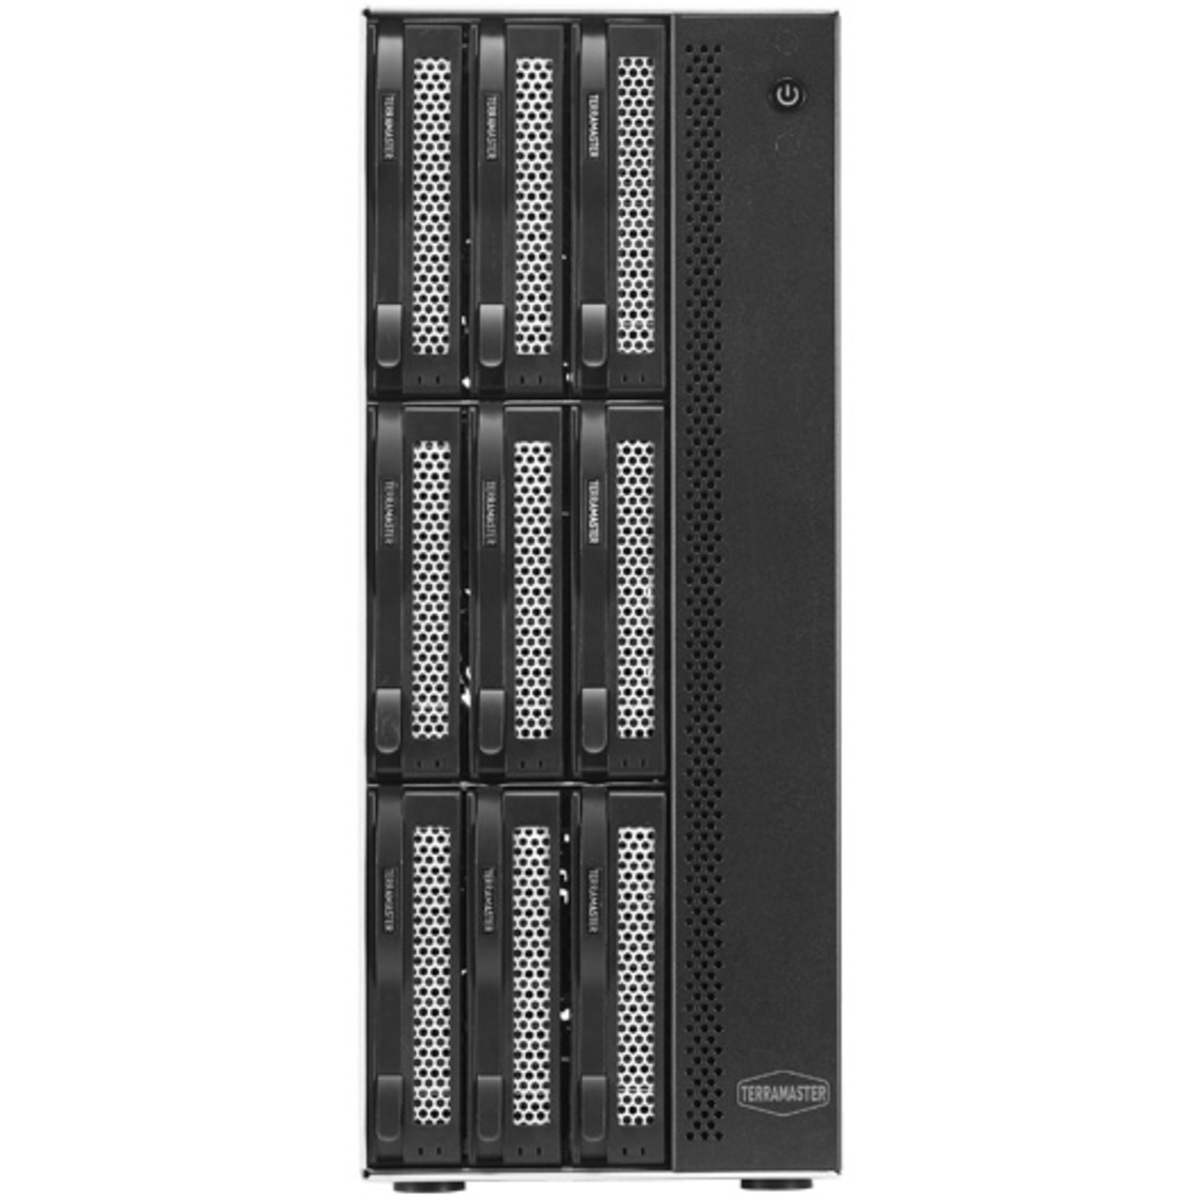 TerraMaster T9-423 216tb 9-Bay Desktop Multimedia / Power User / Business NAS - Network Attached Storage Device 9x24tb Seagate IronWolf Pro ST24000NT002 3.5 7200rpm SATA 6Gb/s HDD NAS Class Drives Installed - Burn-In Tested T9-423